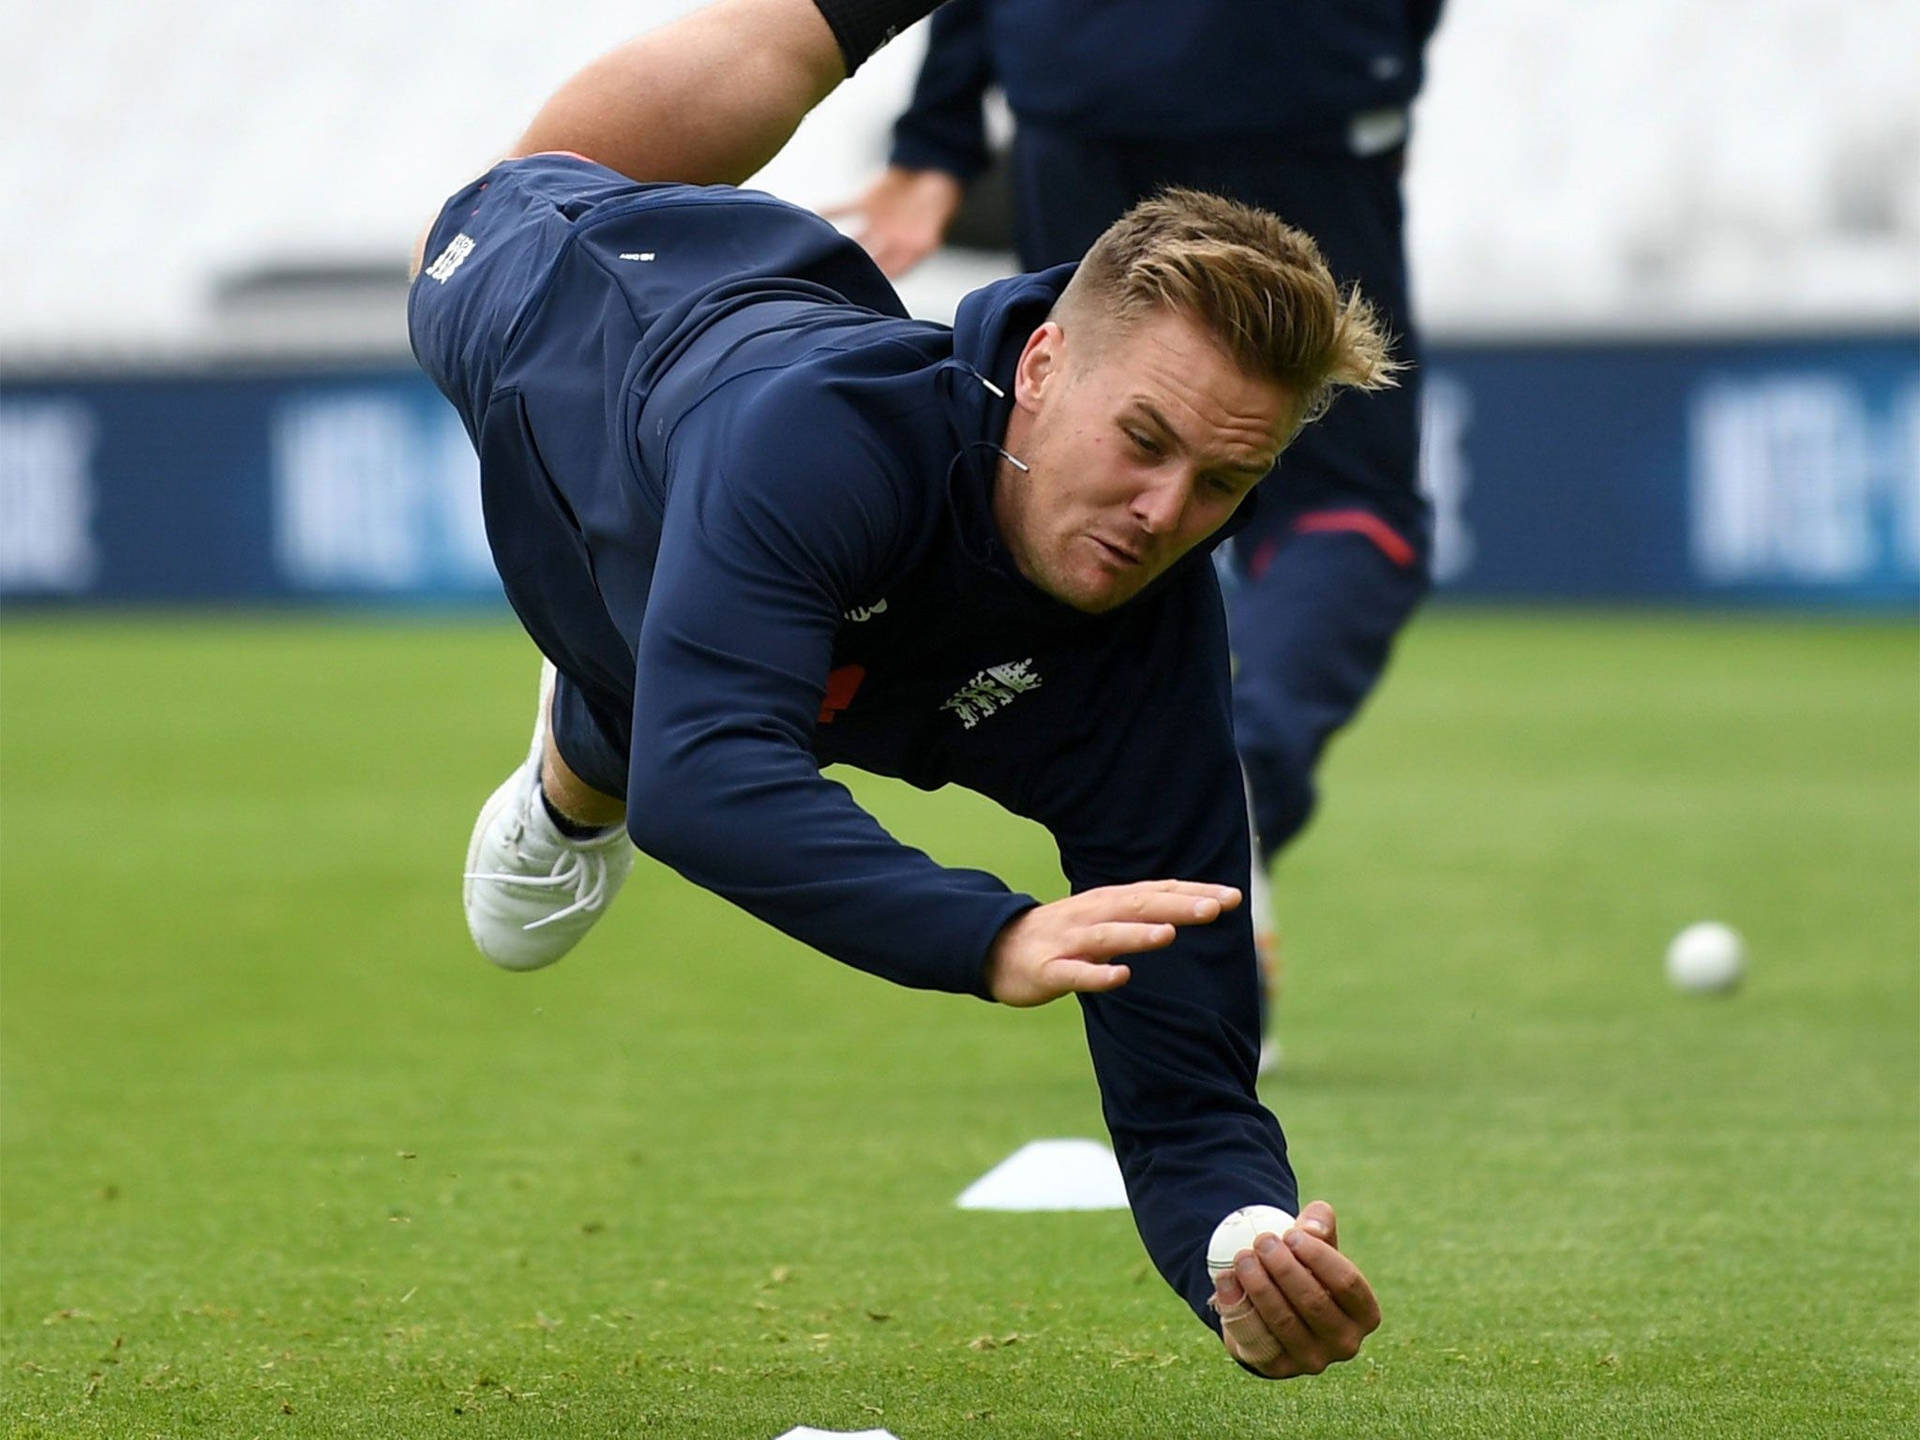 Jason Roy Diving For The Ball